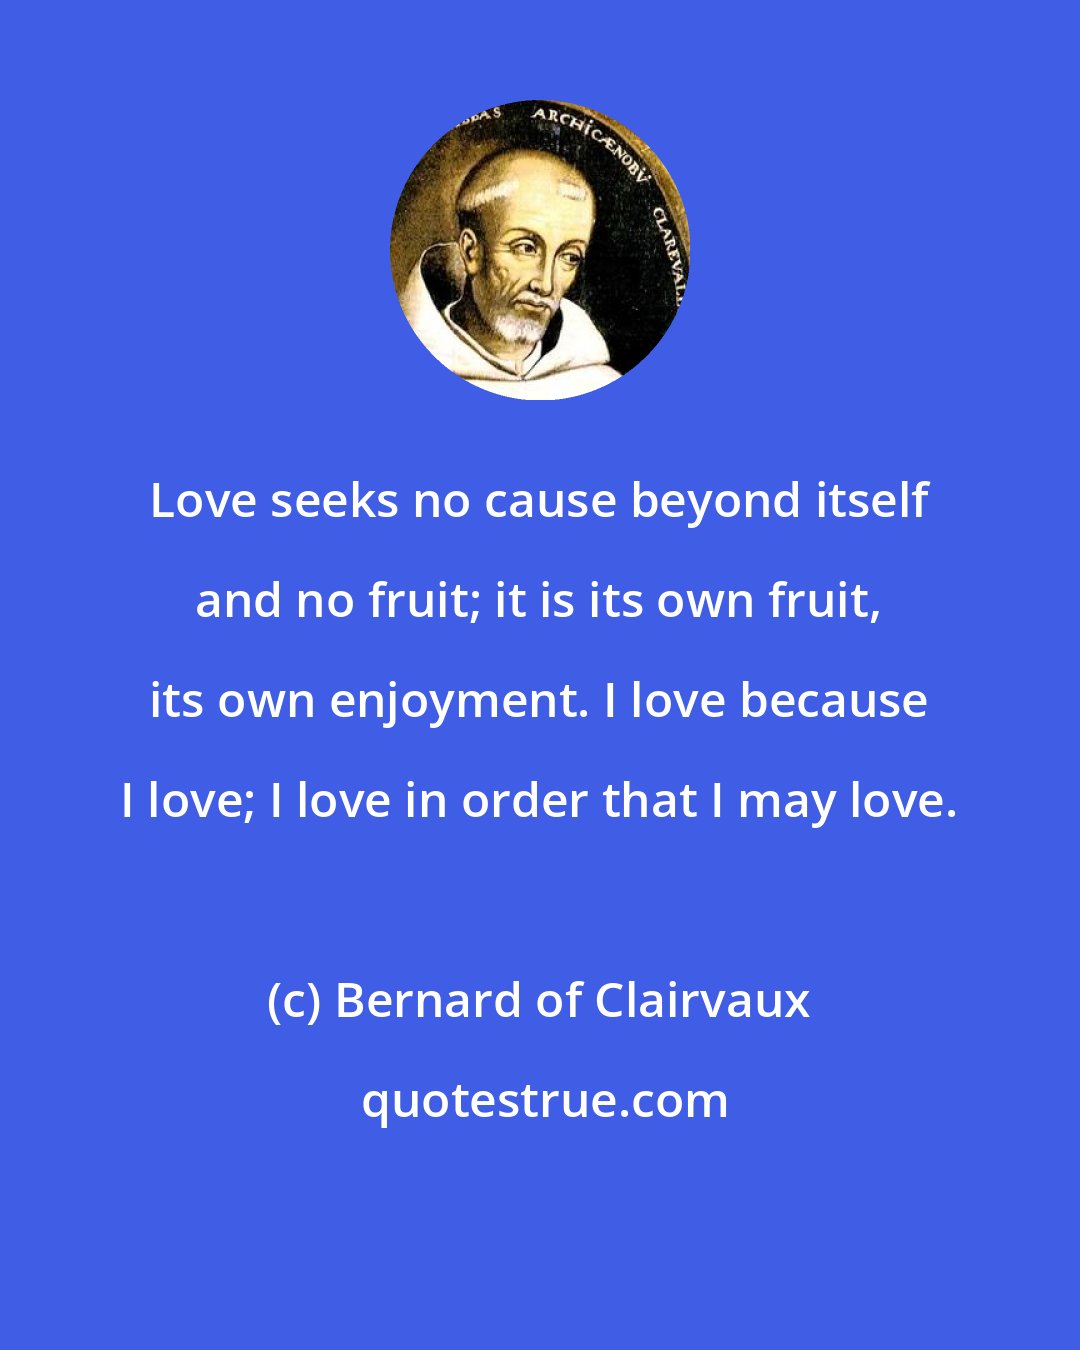 Bernard of Clairvaux: Love seeks no cause beyond itself and no fruit; it is its own fruit, its own enjoyment. I love because I love; I love in order that I may love.